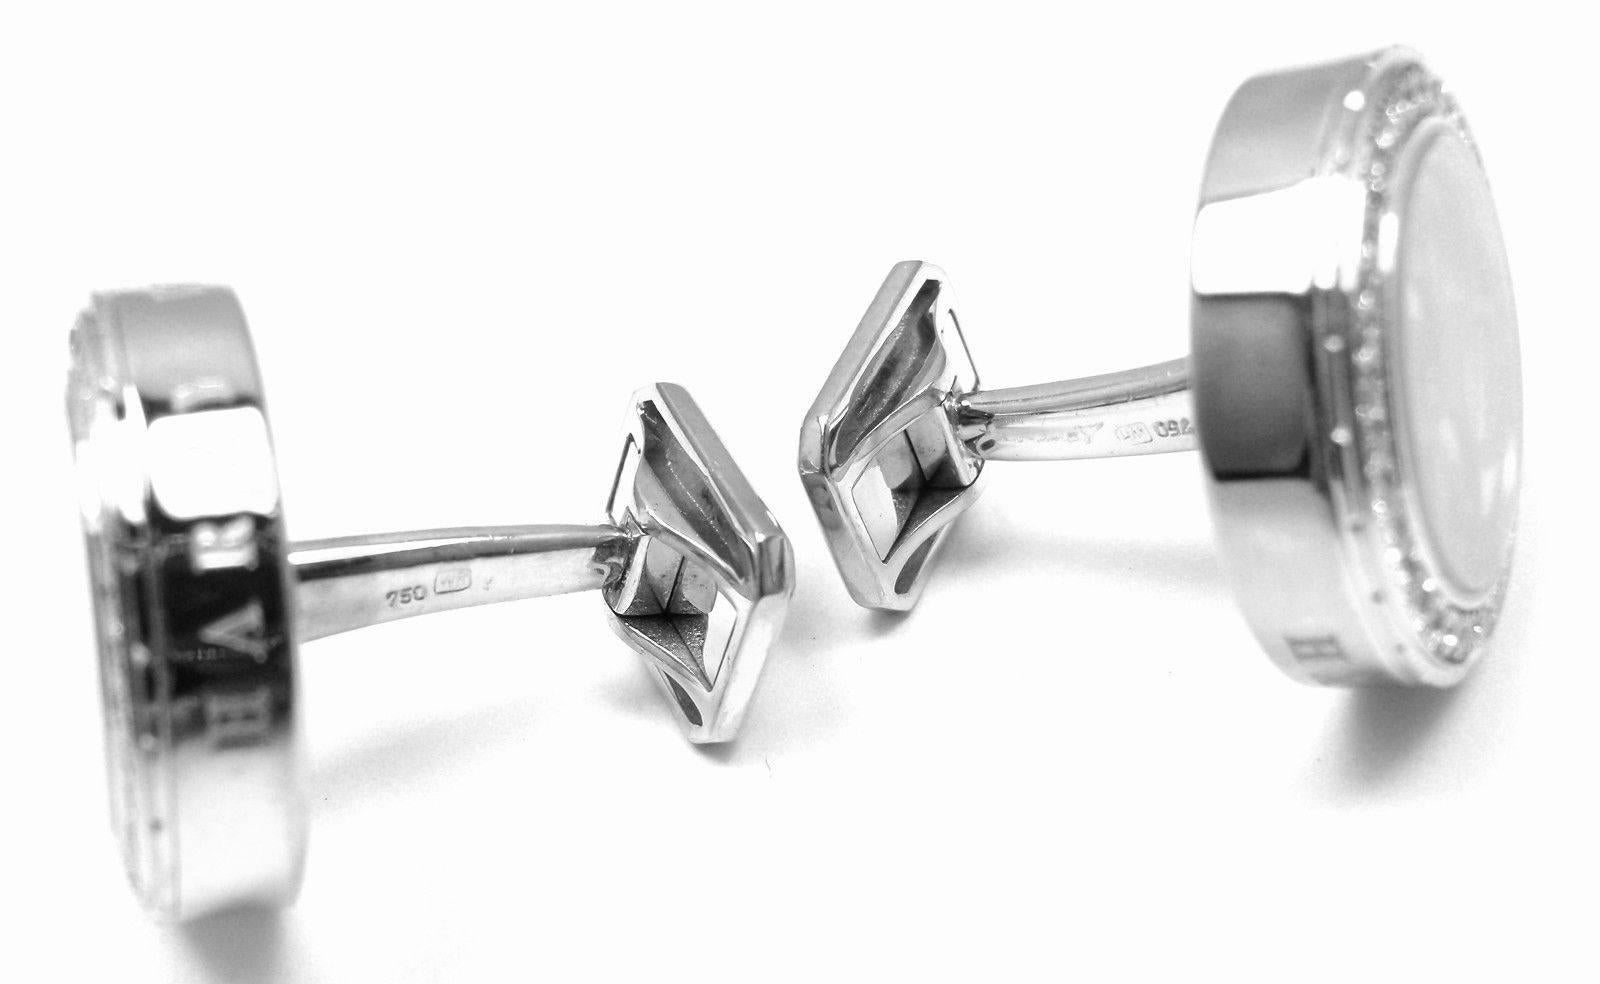 18k White Gold Diamond Ocean Cufflinks by Harry Winston.
With 70 round brilliant cut diamonds VS1 clarity, G color total weight approx. 1.20ct

Details:
Measurements: 19mm x 22mm x 12mm
Weight: 28.4 grams
Stamped Hallmarks: HW 750 Harry